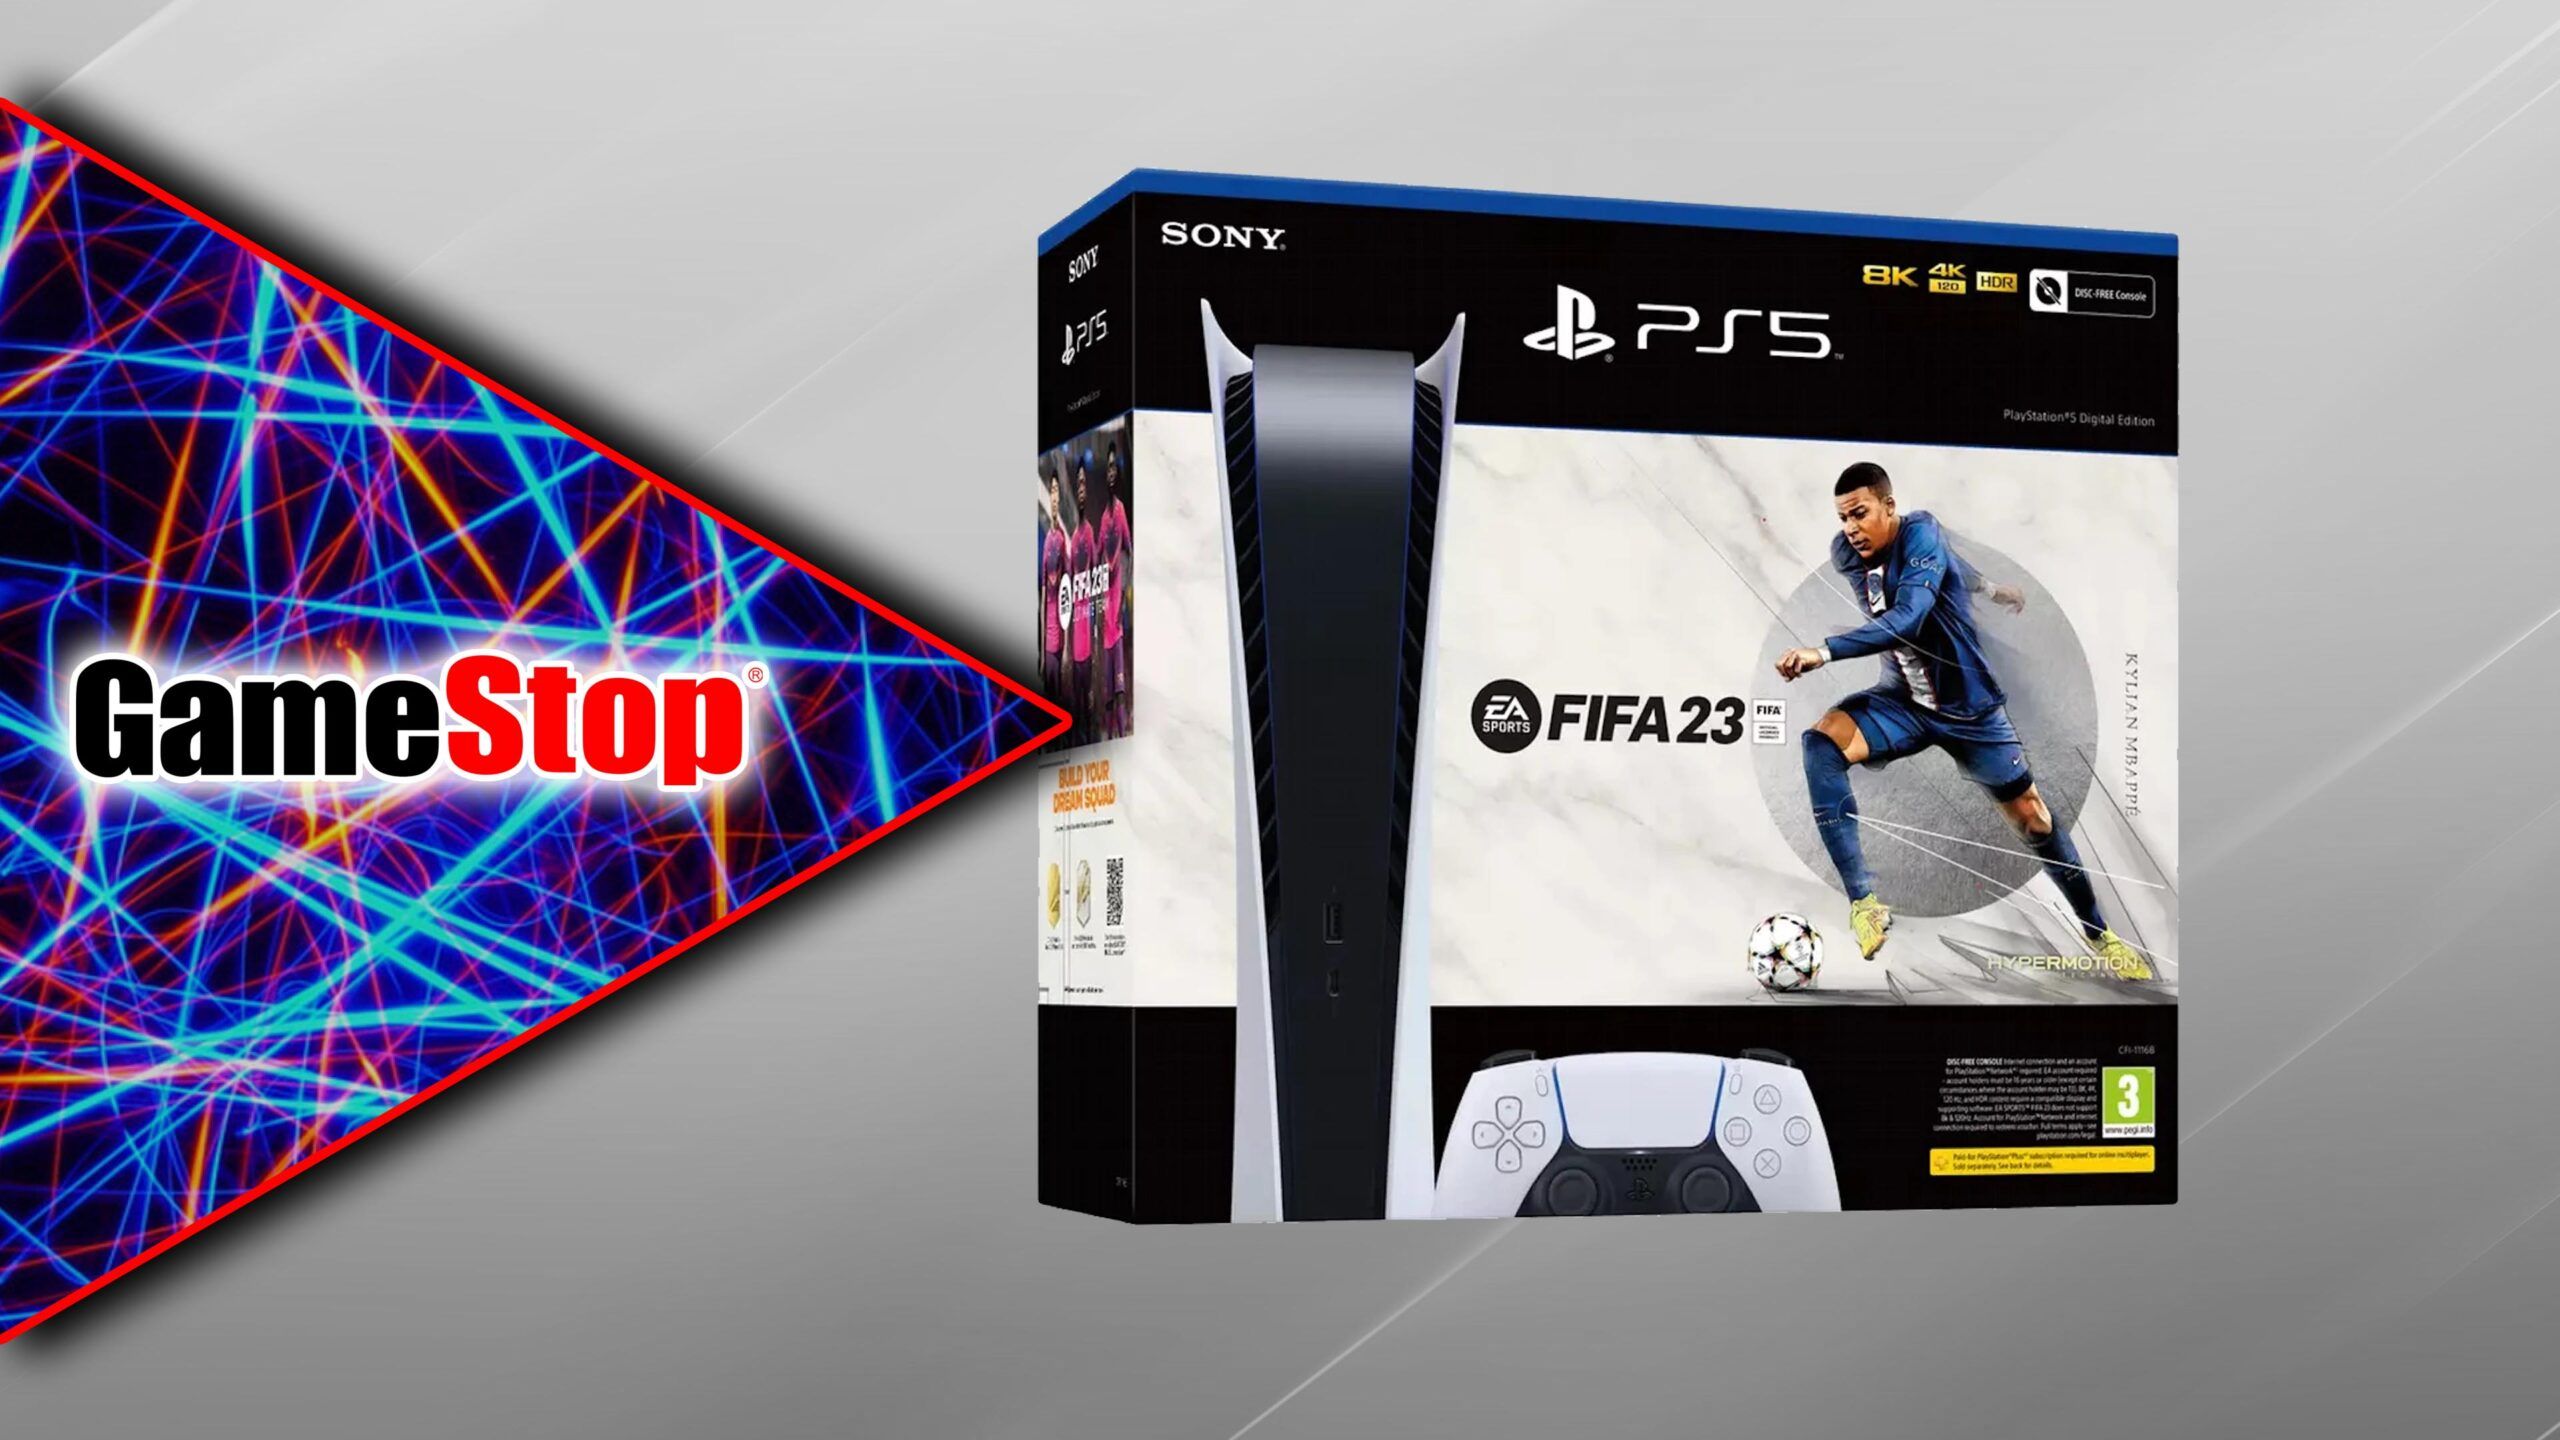 The PlayStation 5 digital edition is available again with FIFA 23 in a new GameStop release this week